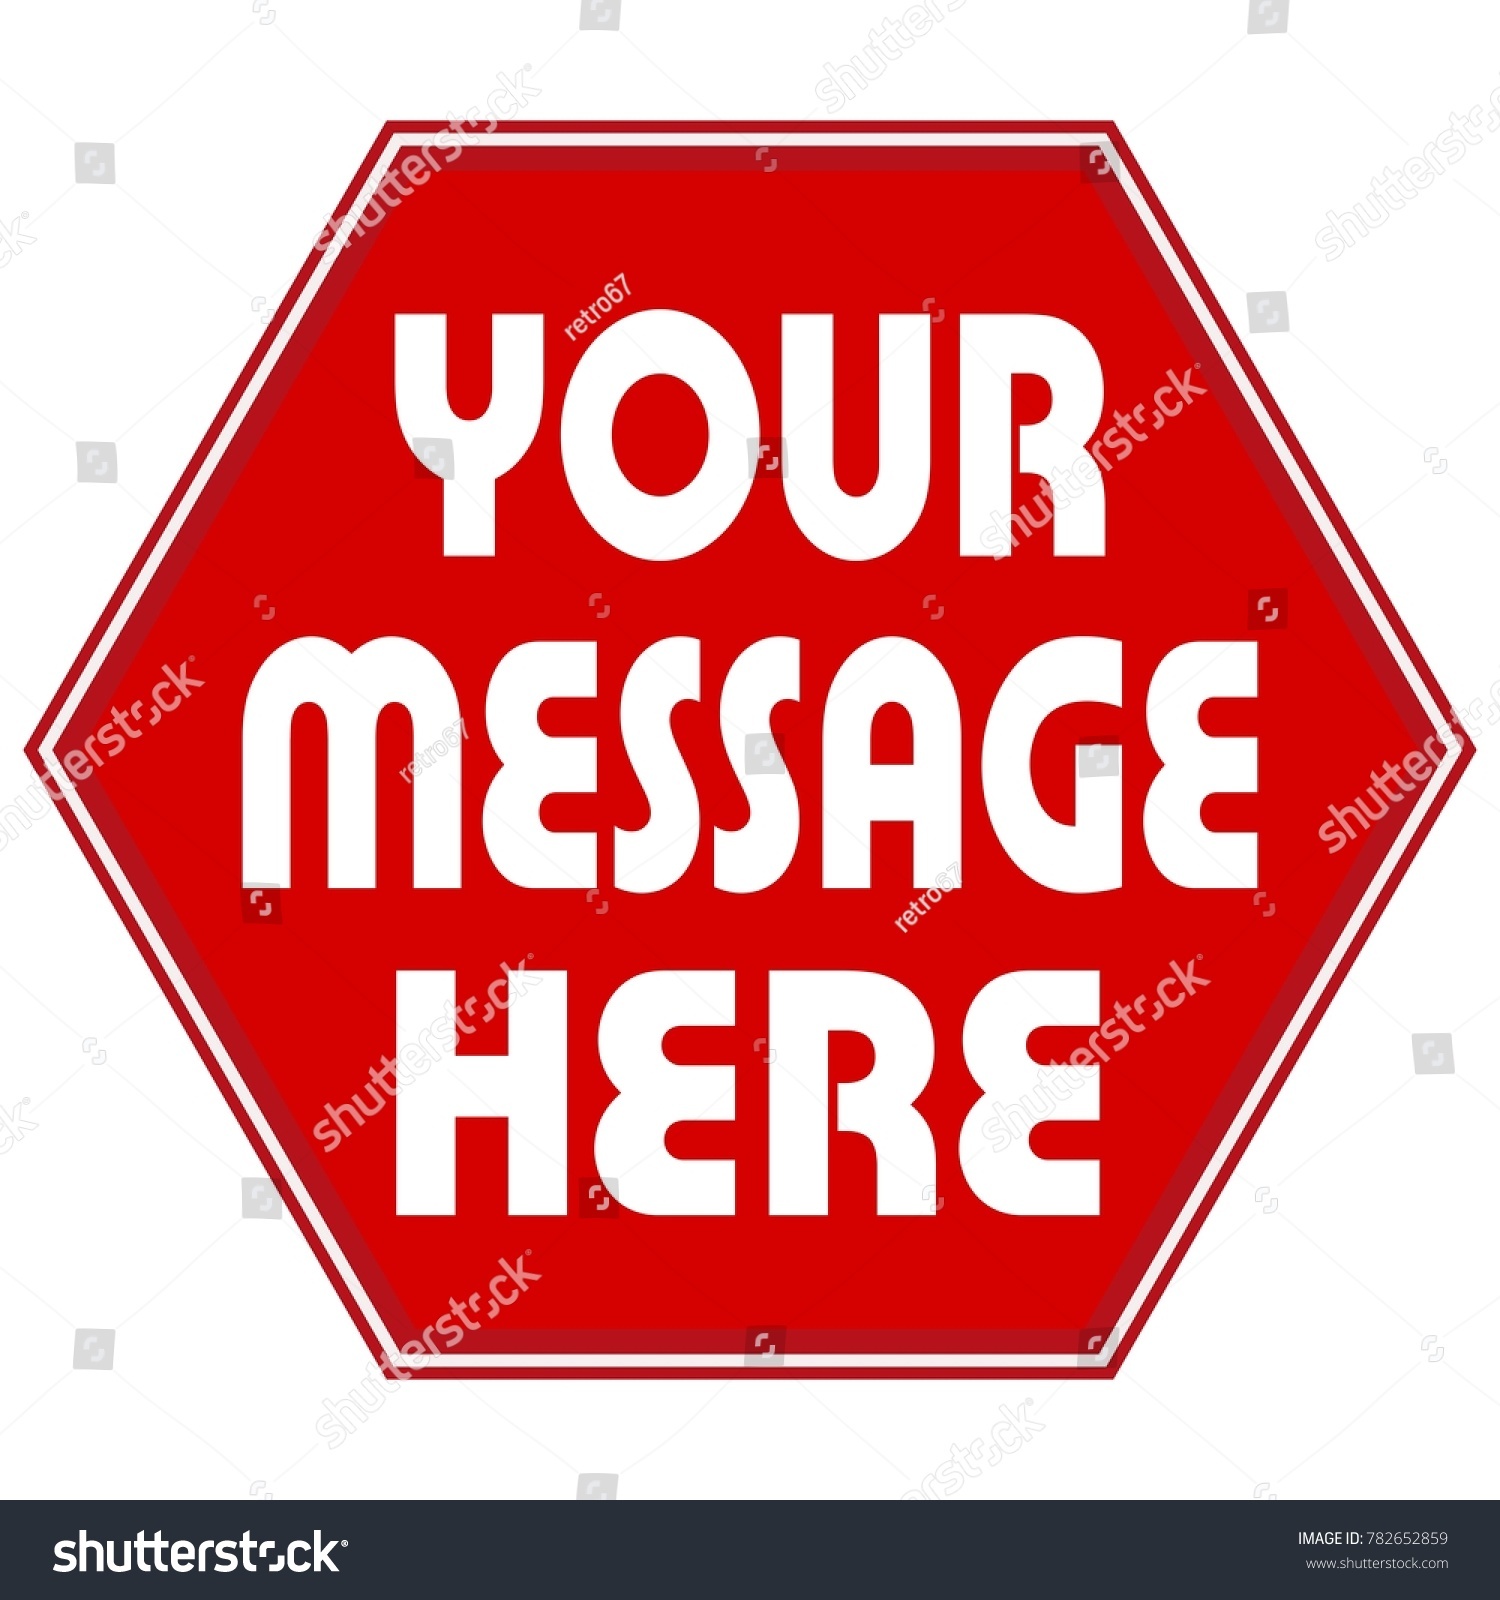 Your message here